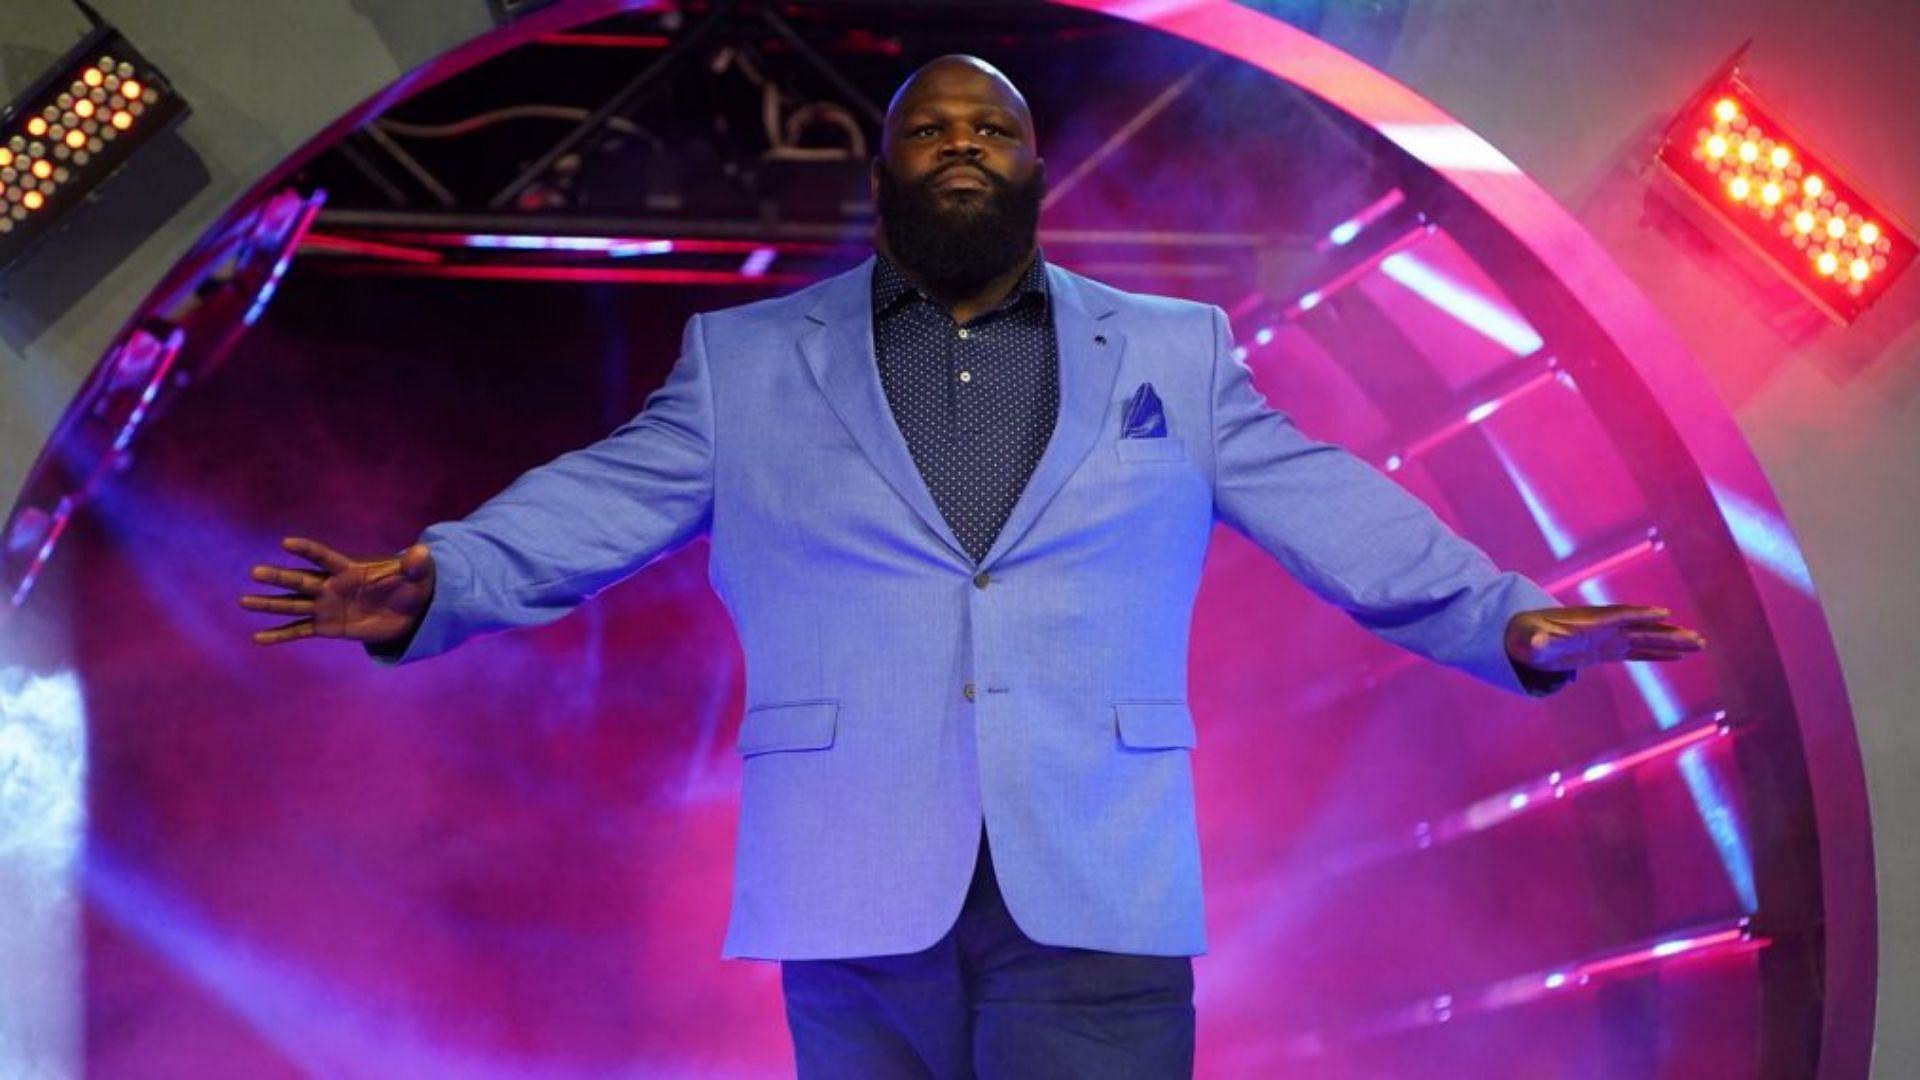 Mark Henry at an AEW event in 2021